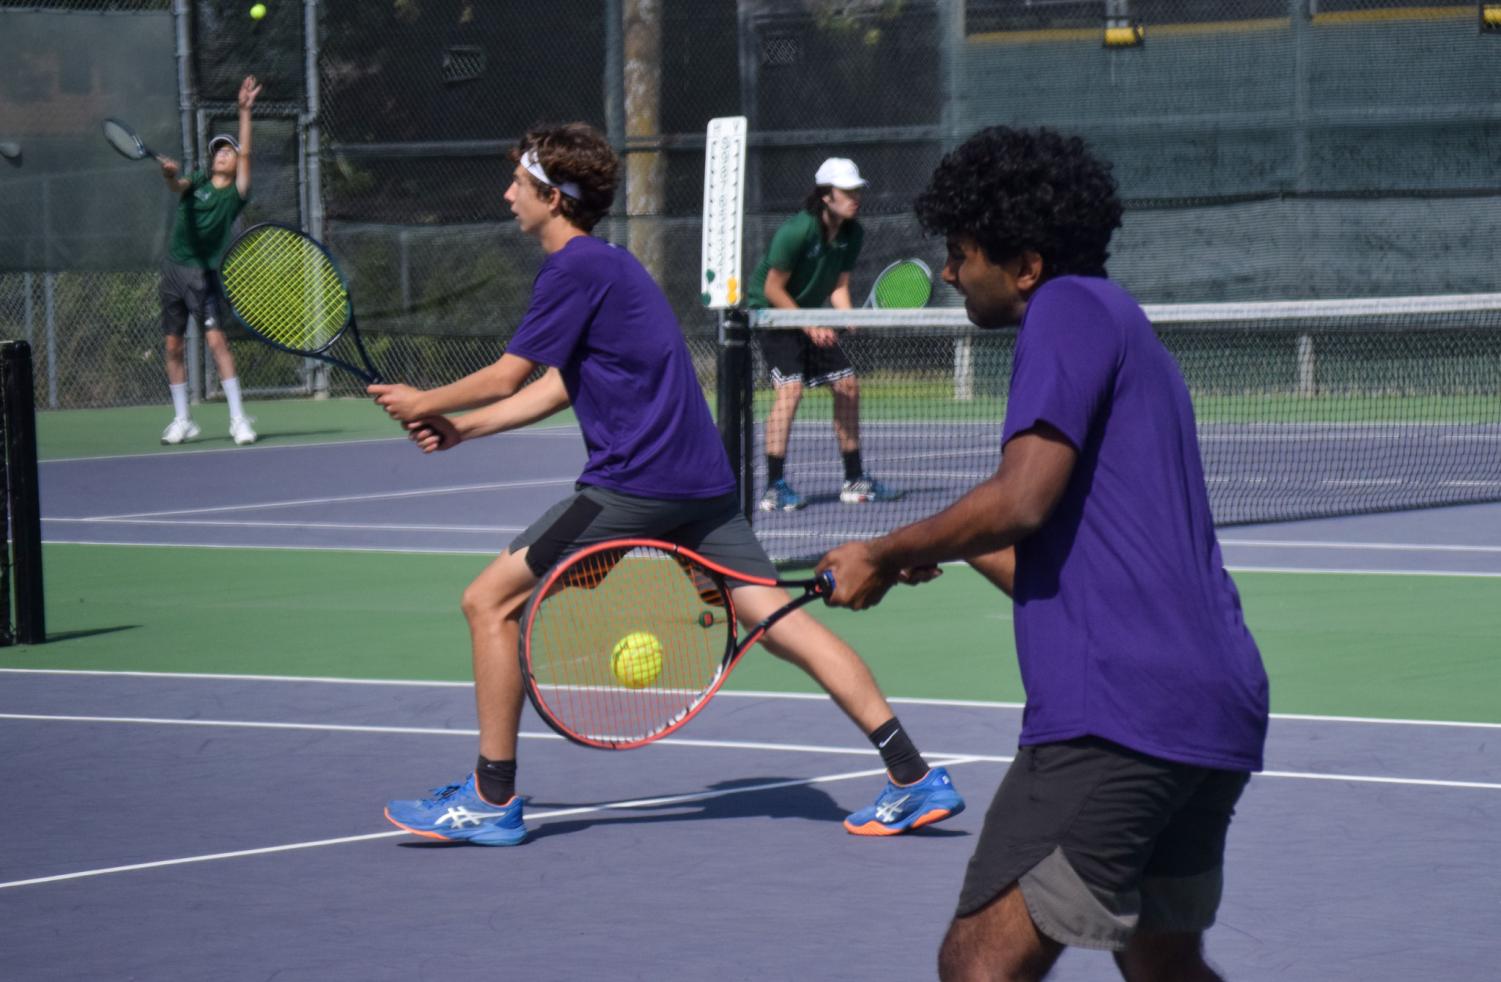 Boys+Varsity+Tennis+Takes+Down+El+Cerrito+High+in+a+Clean+7-0+Sweep+to+Advance+to+NCS+Quarterfinals